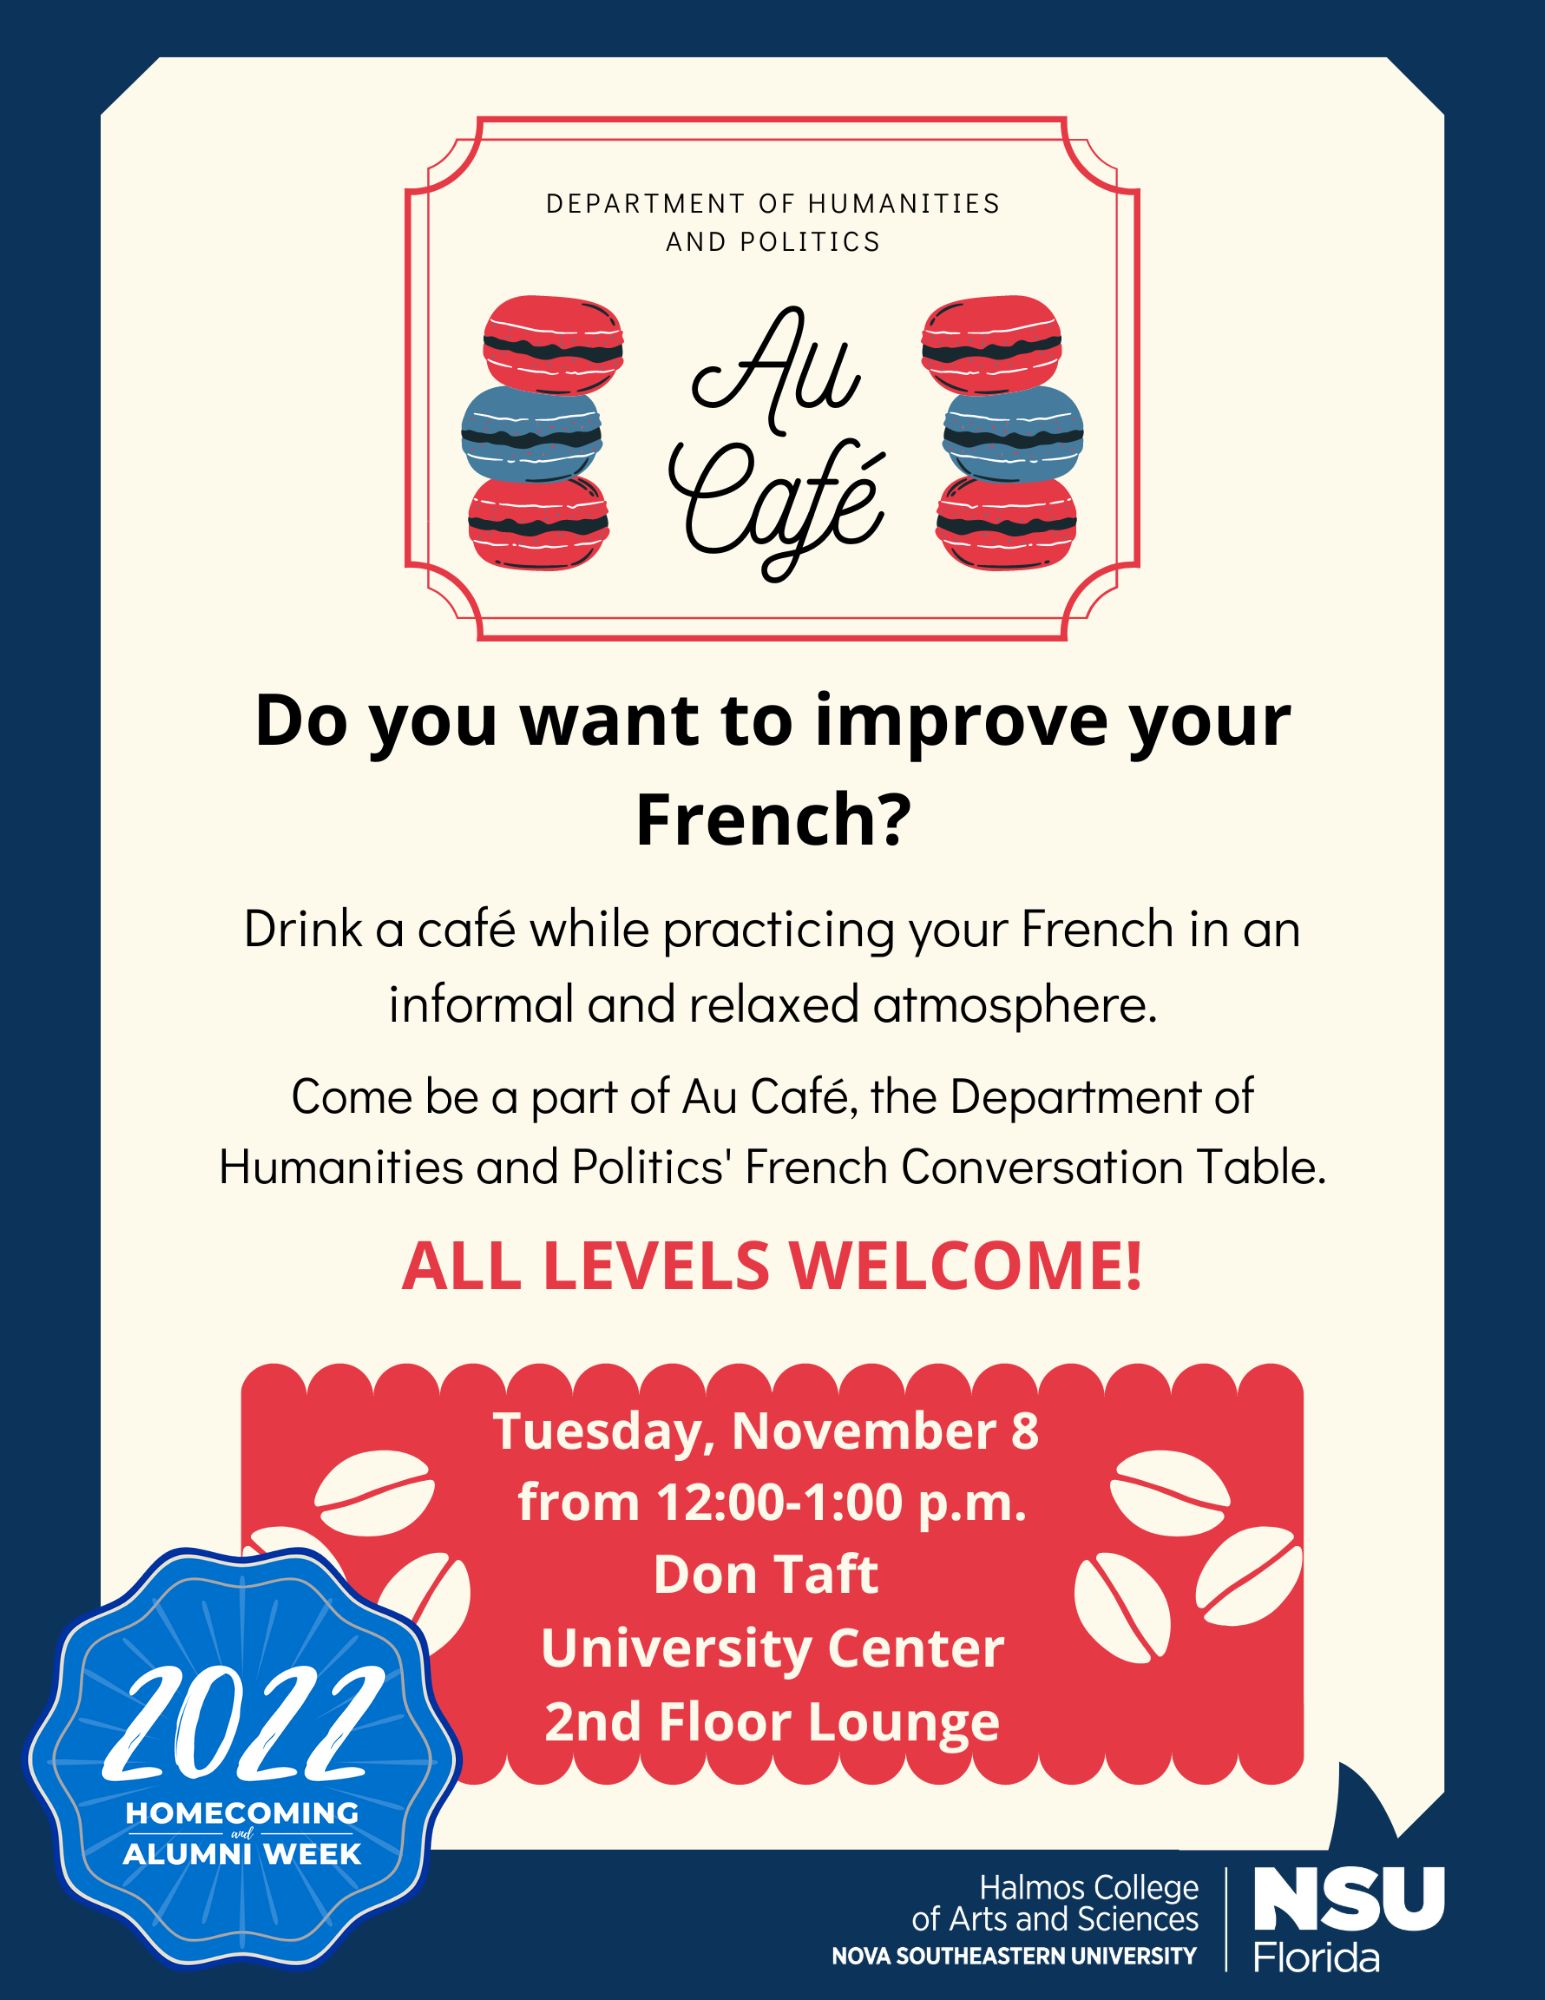 2022 Au Cafe flyer inviting those who want to practice their French conversation skills